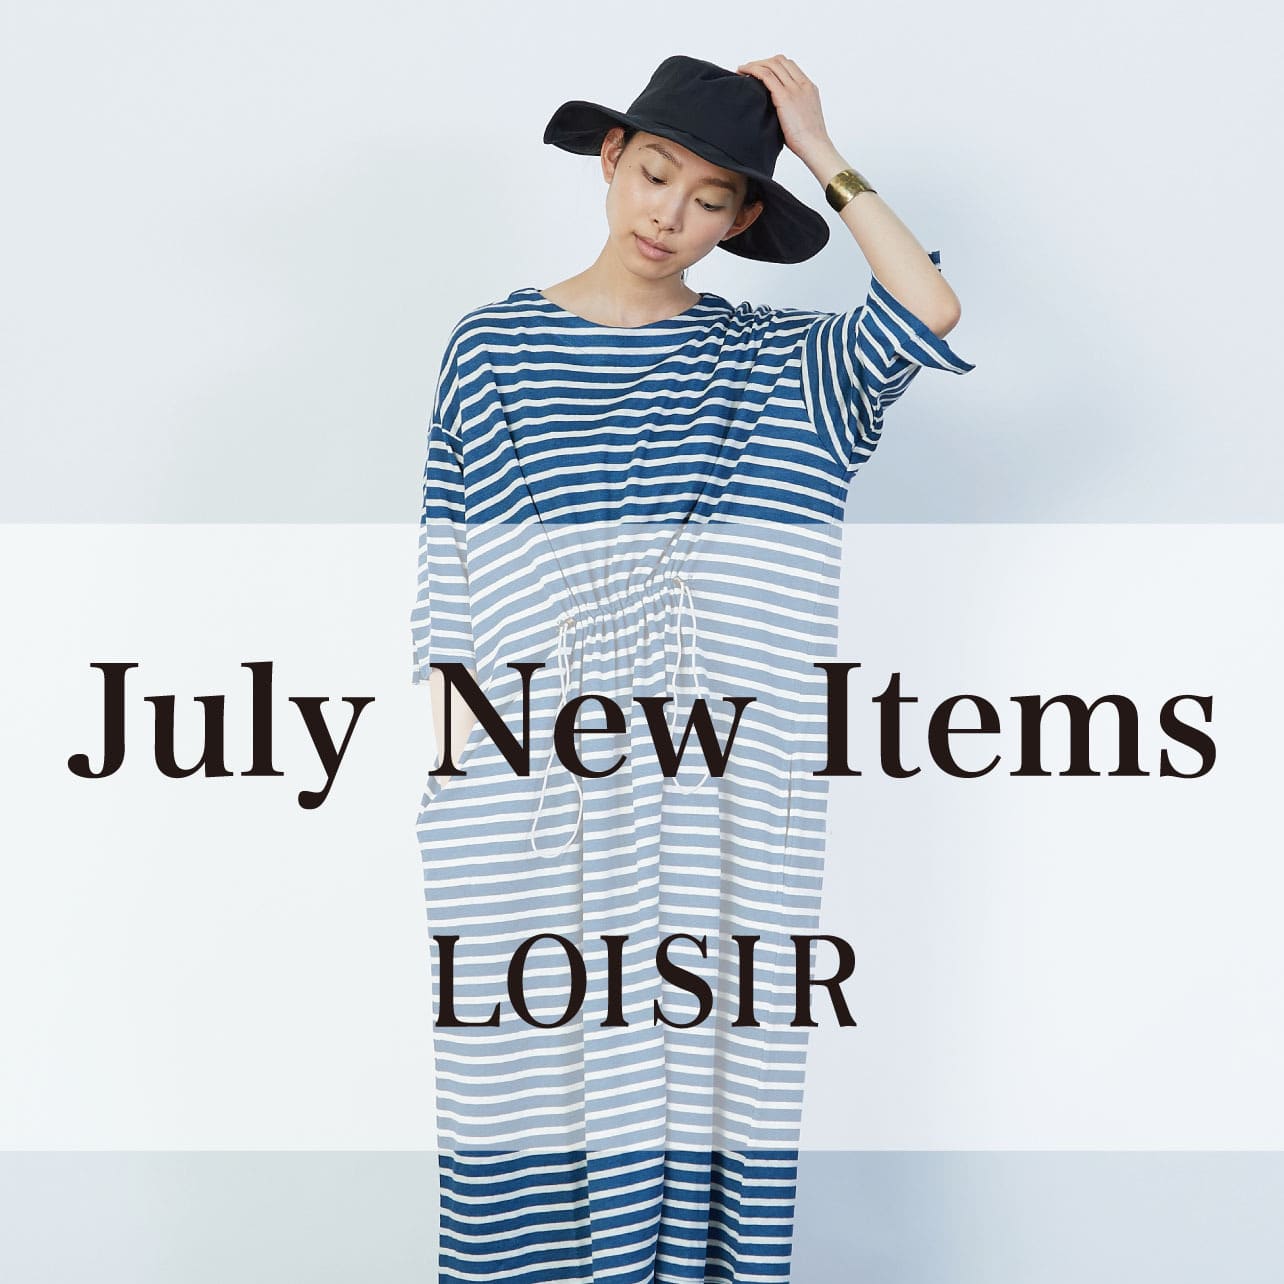 July New Items